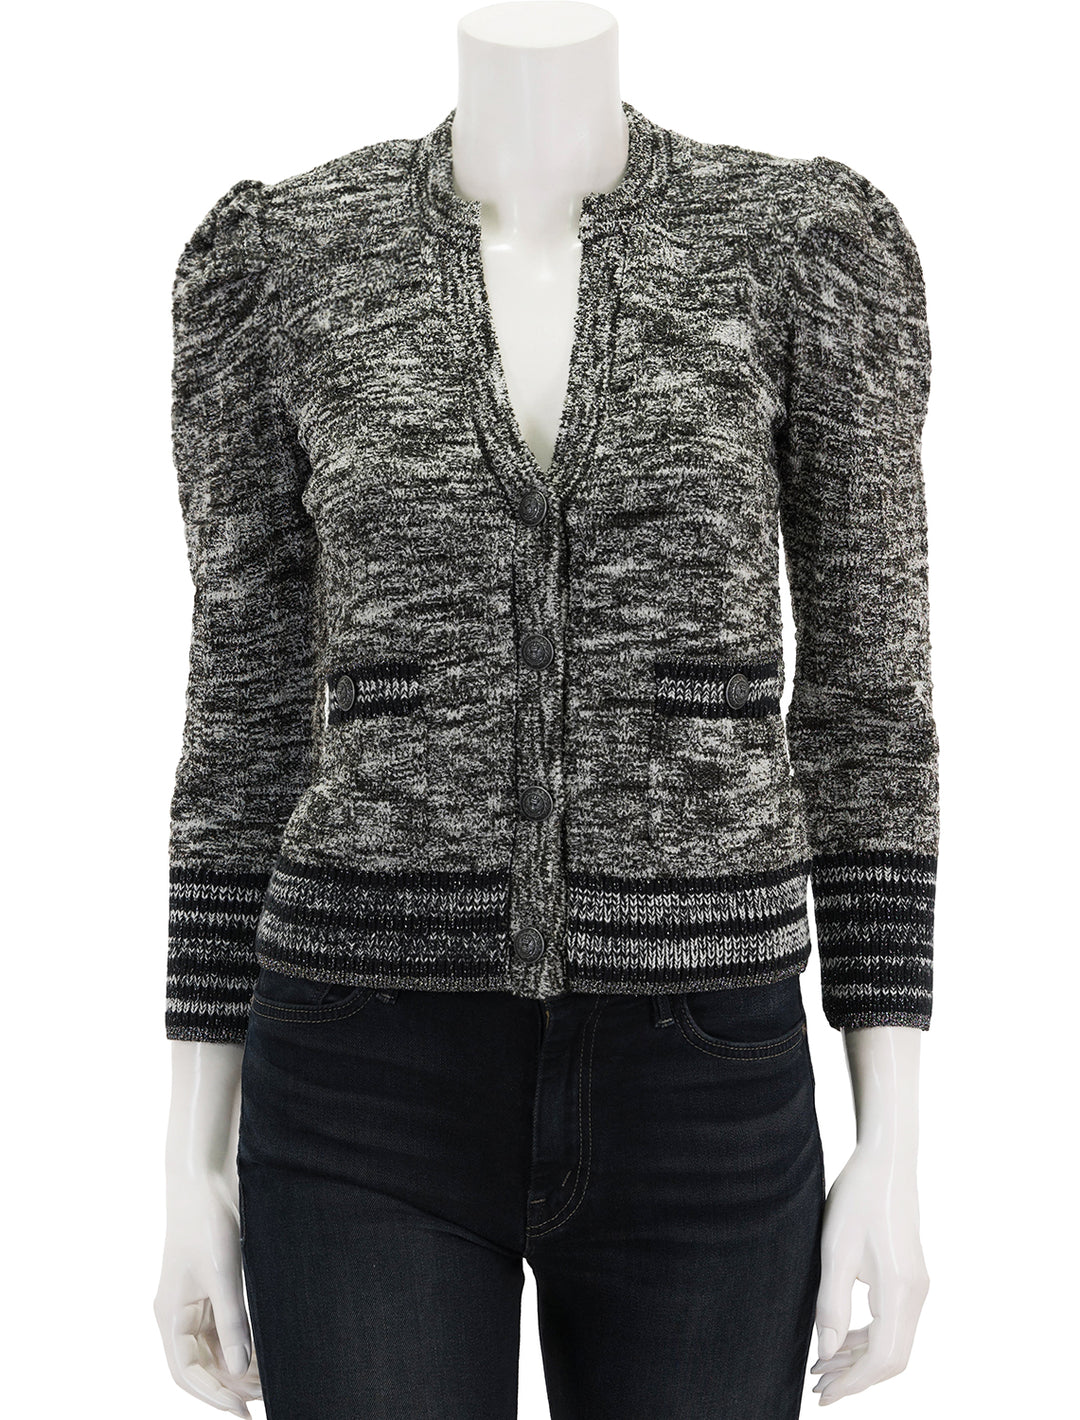 Front view of L'agence's jenni waffle stitch cardi in black and white multi.